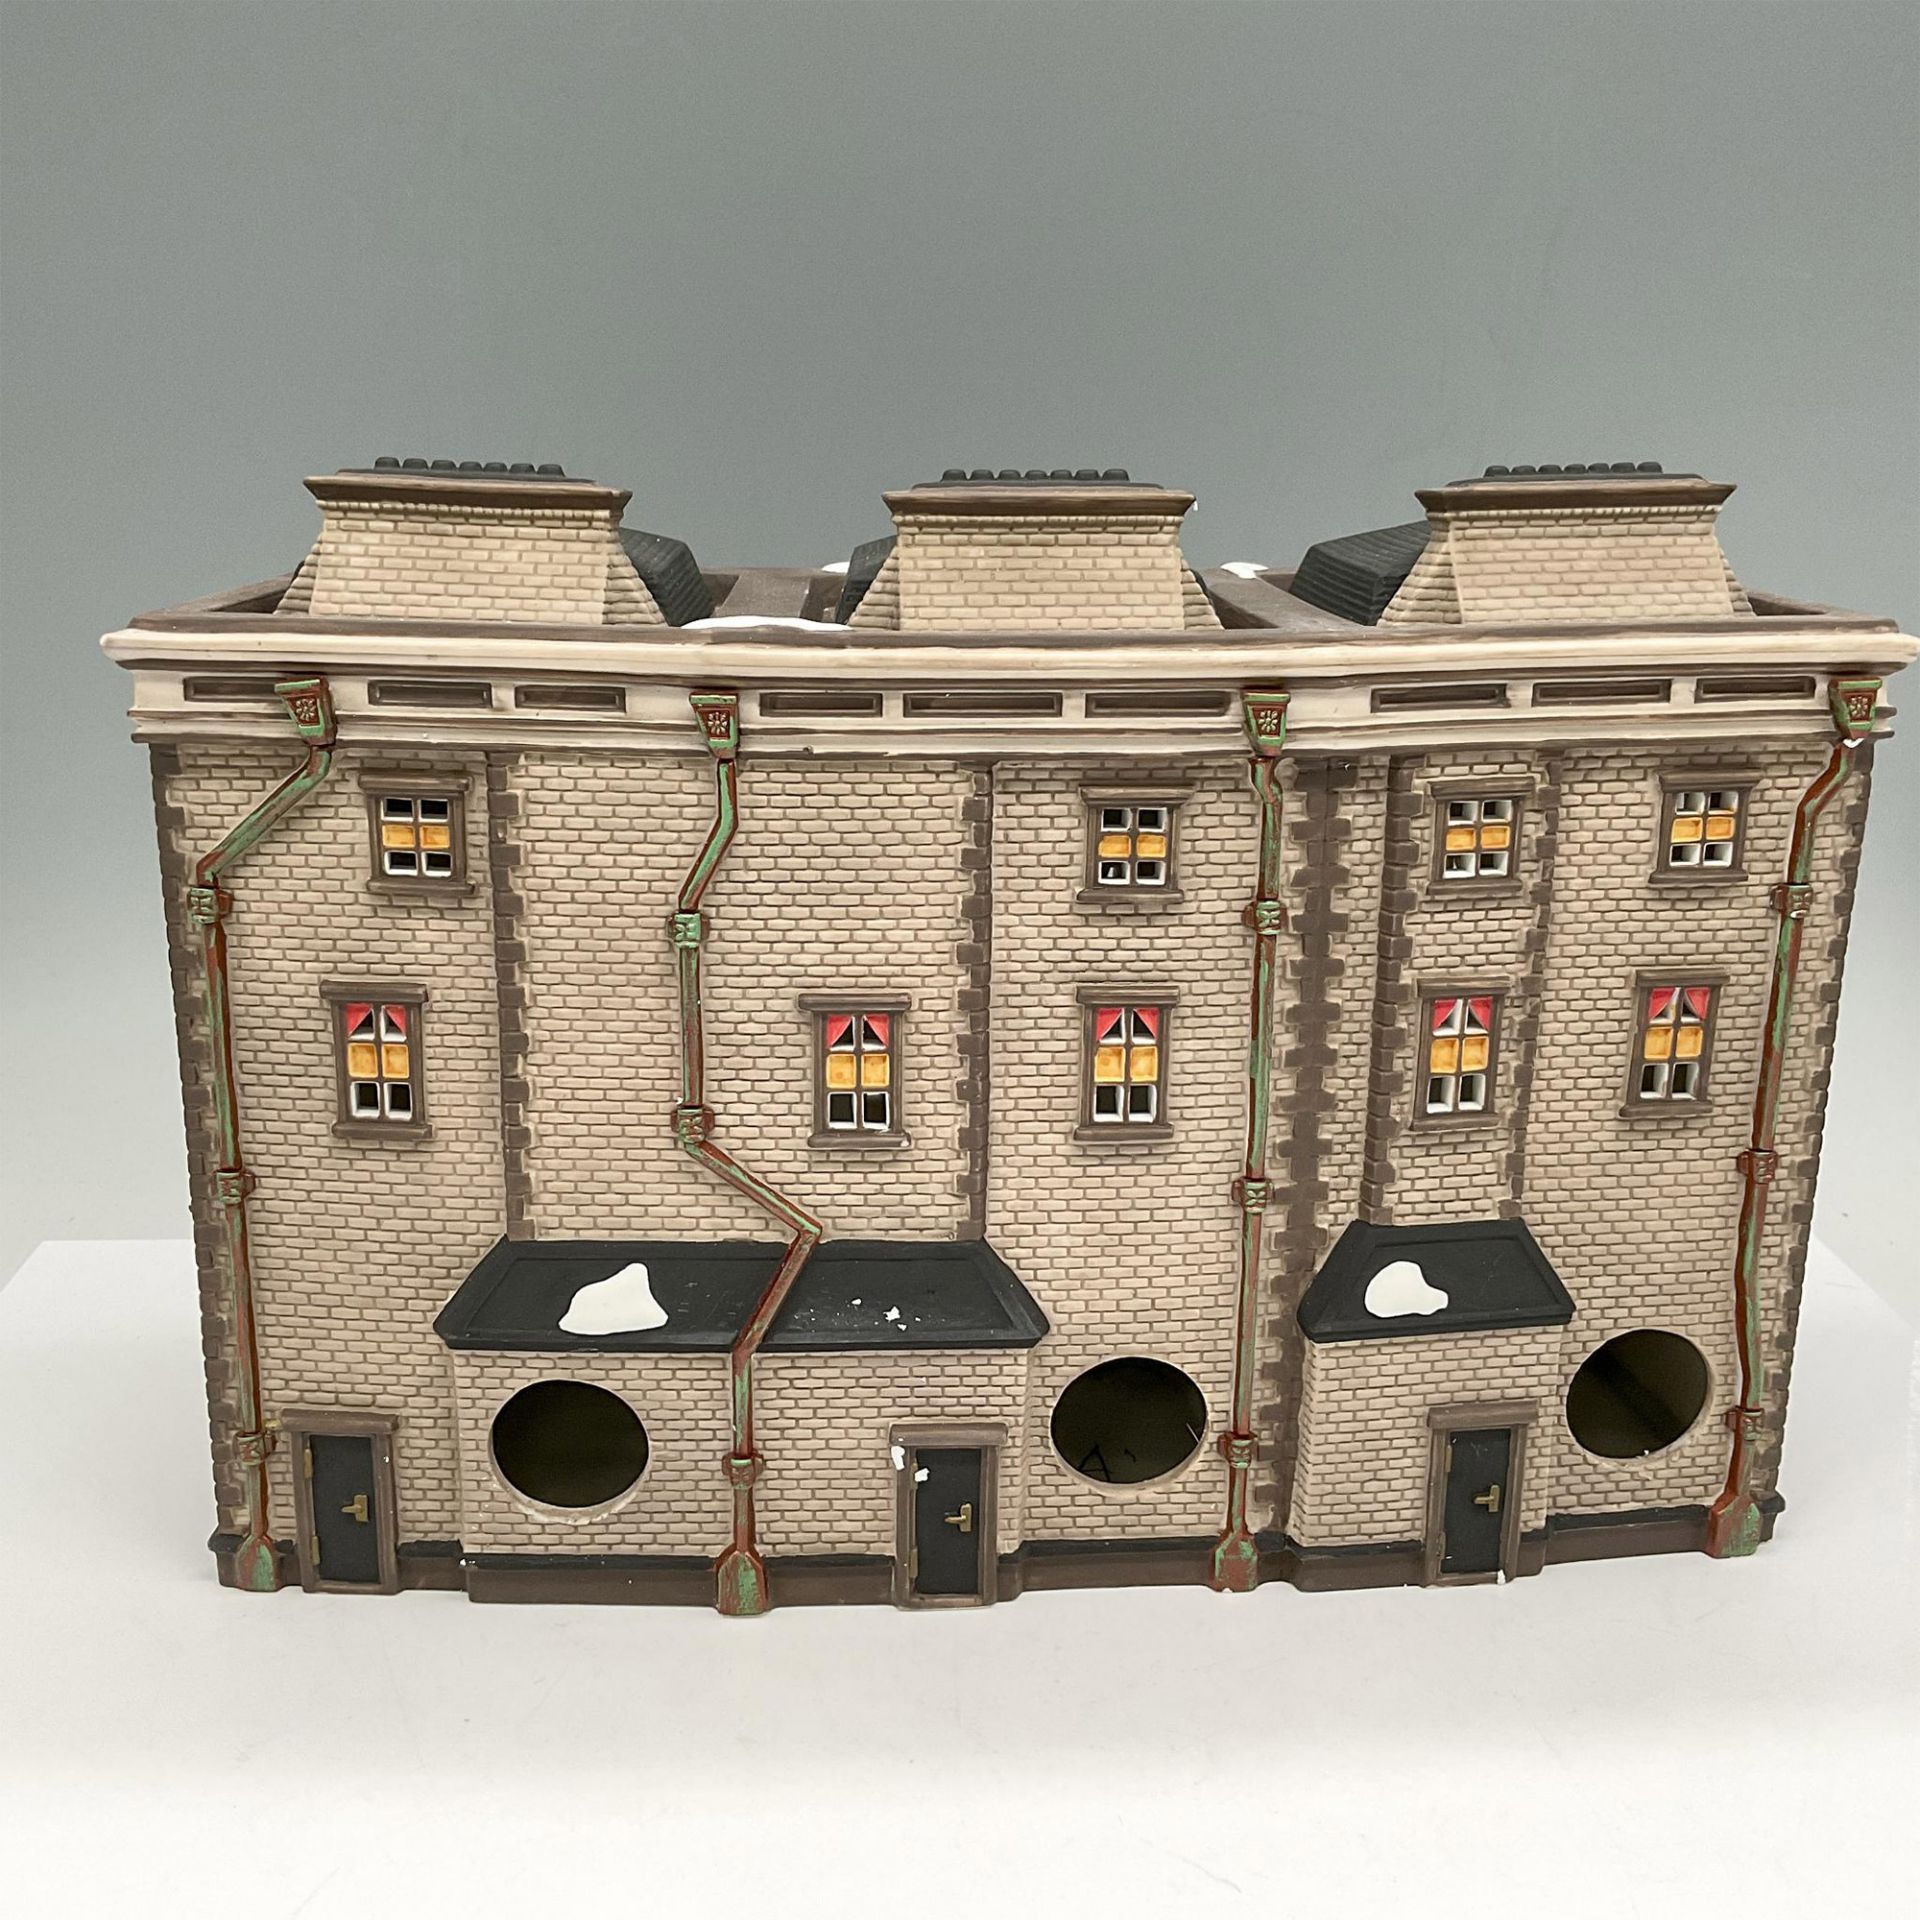 Department 56 Porcelain Dickens' Village Series, Mulberrie Court - Image 3 of 5